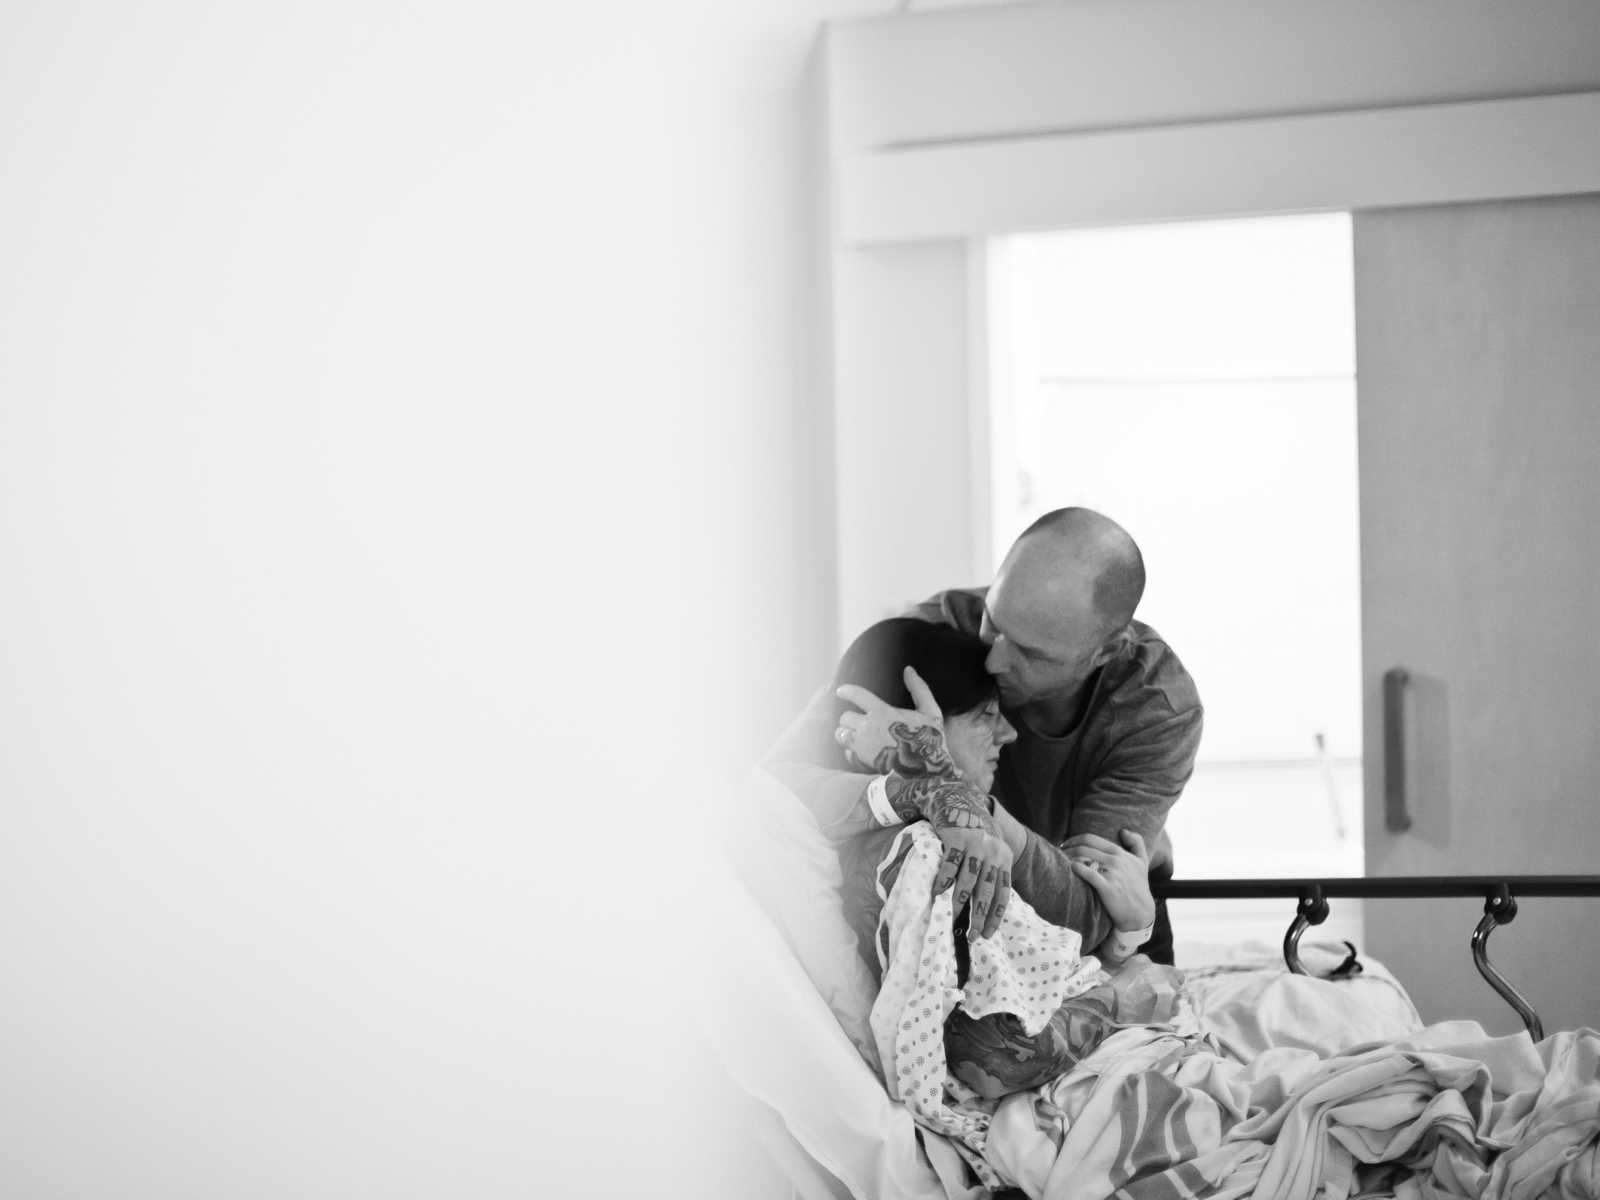 Woman who just gave birth sits up on hospital bed as husband kisses her fore head with his arms wrapped around her